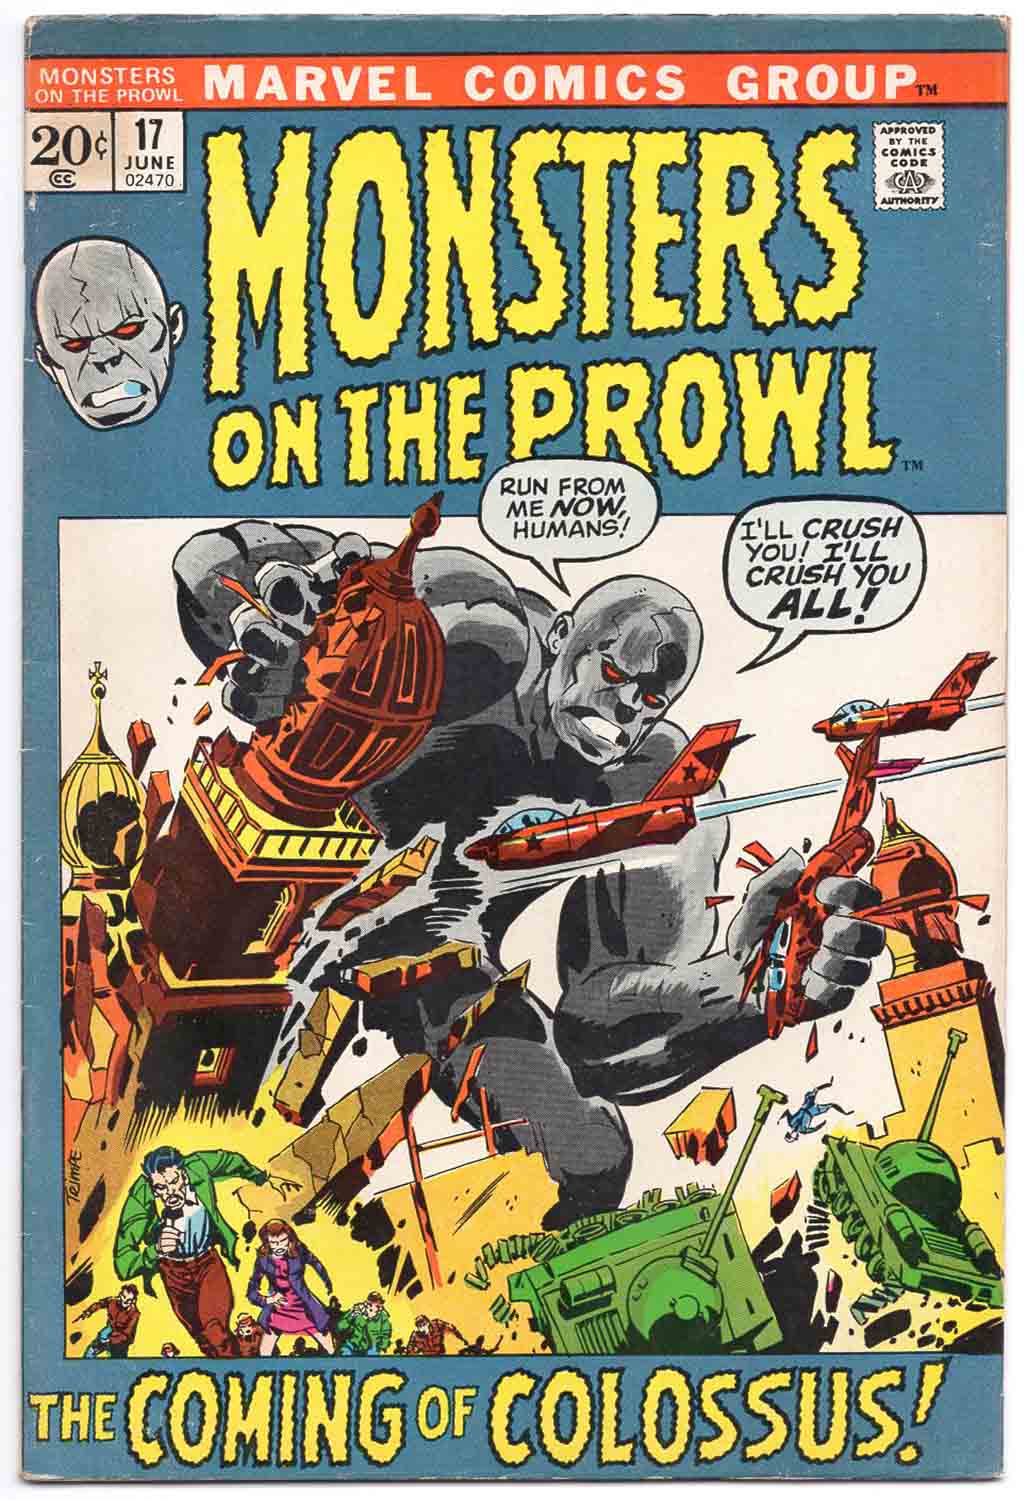 Monsters on the Prowl #17